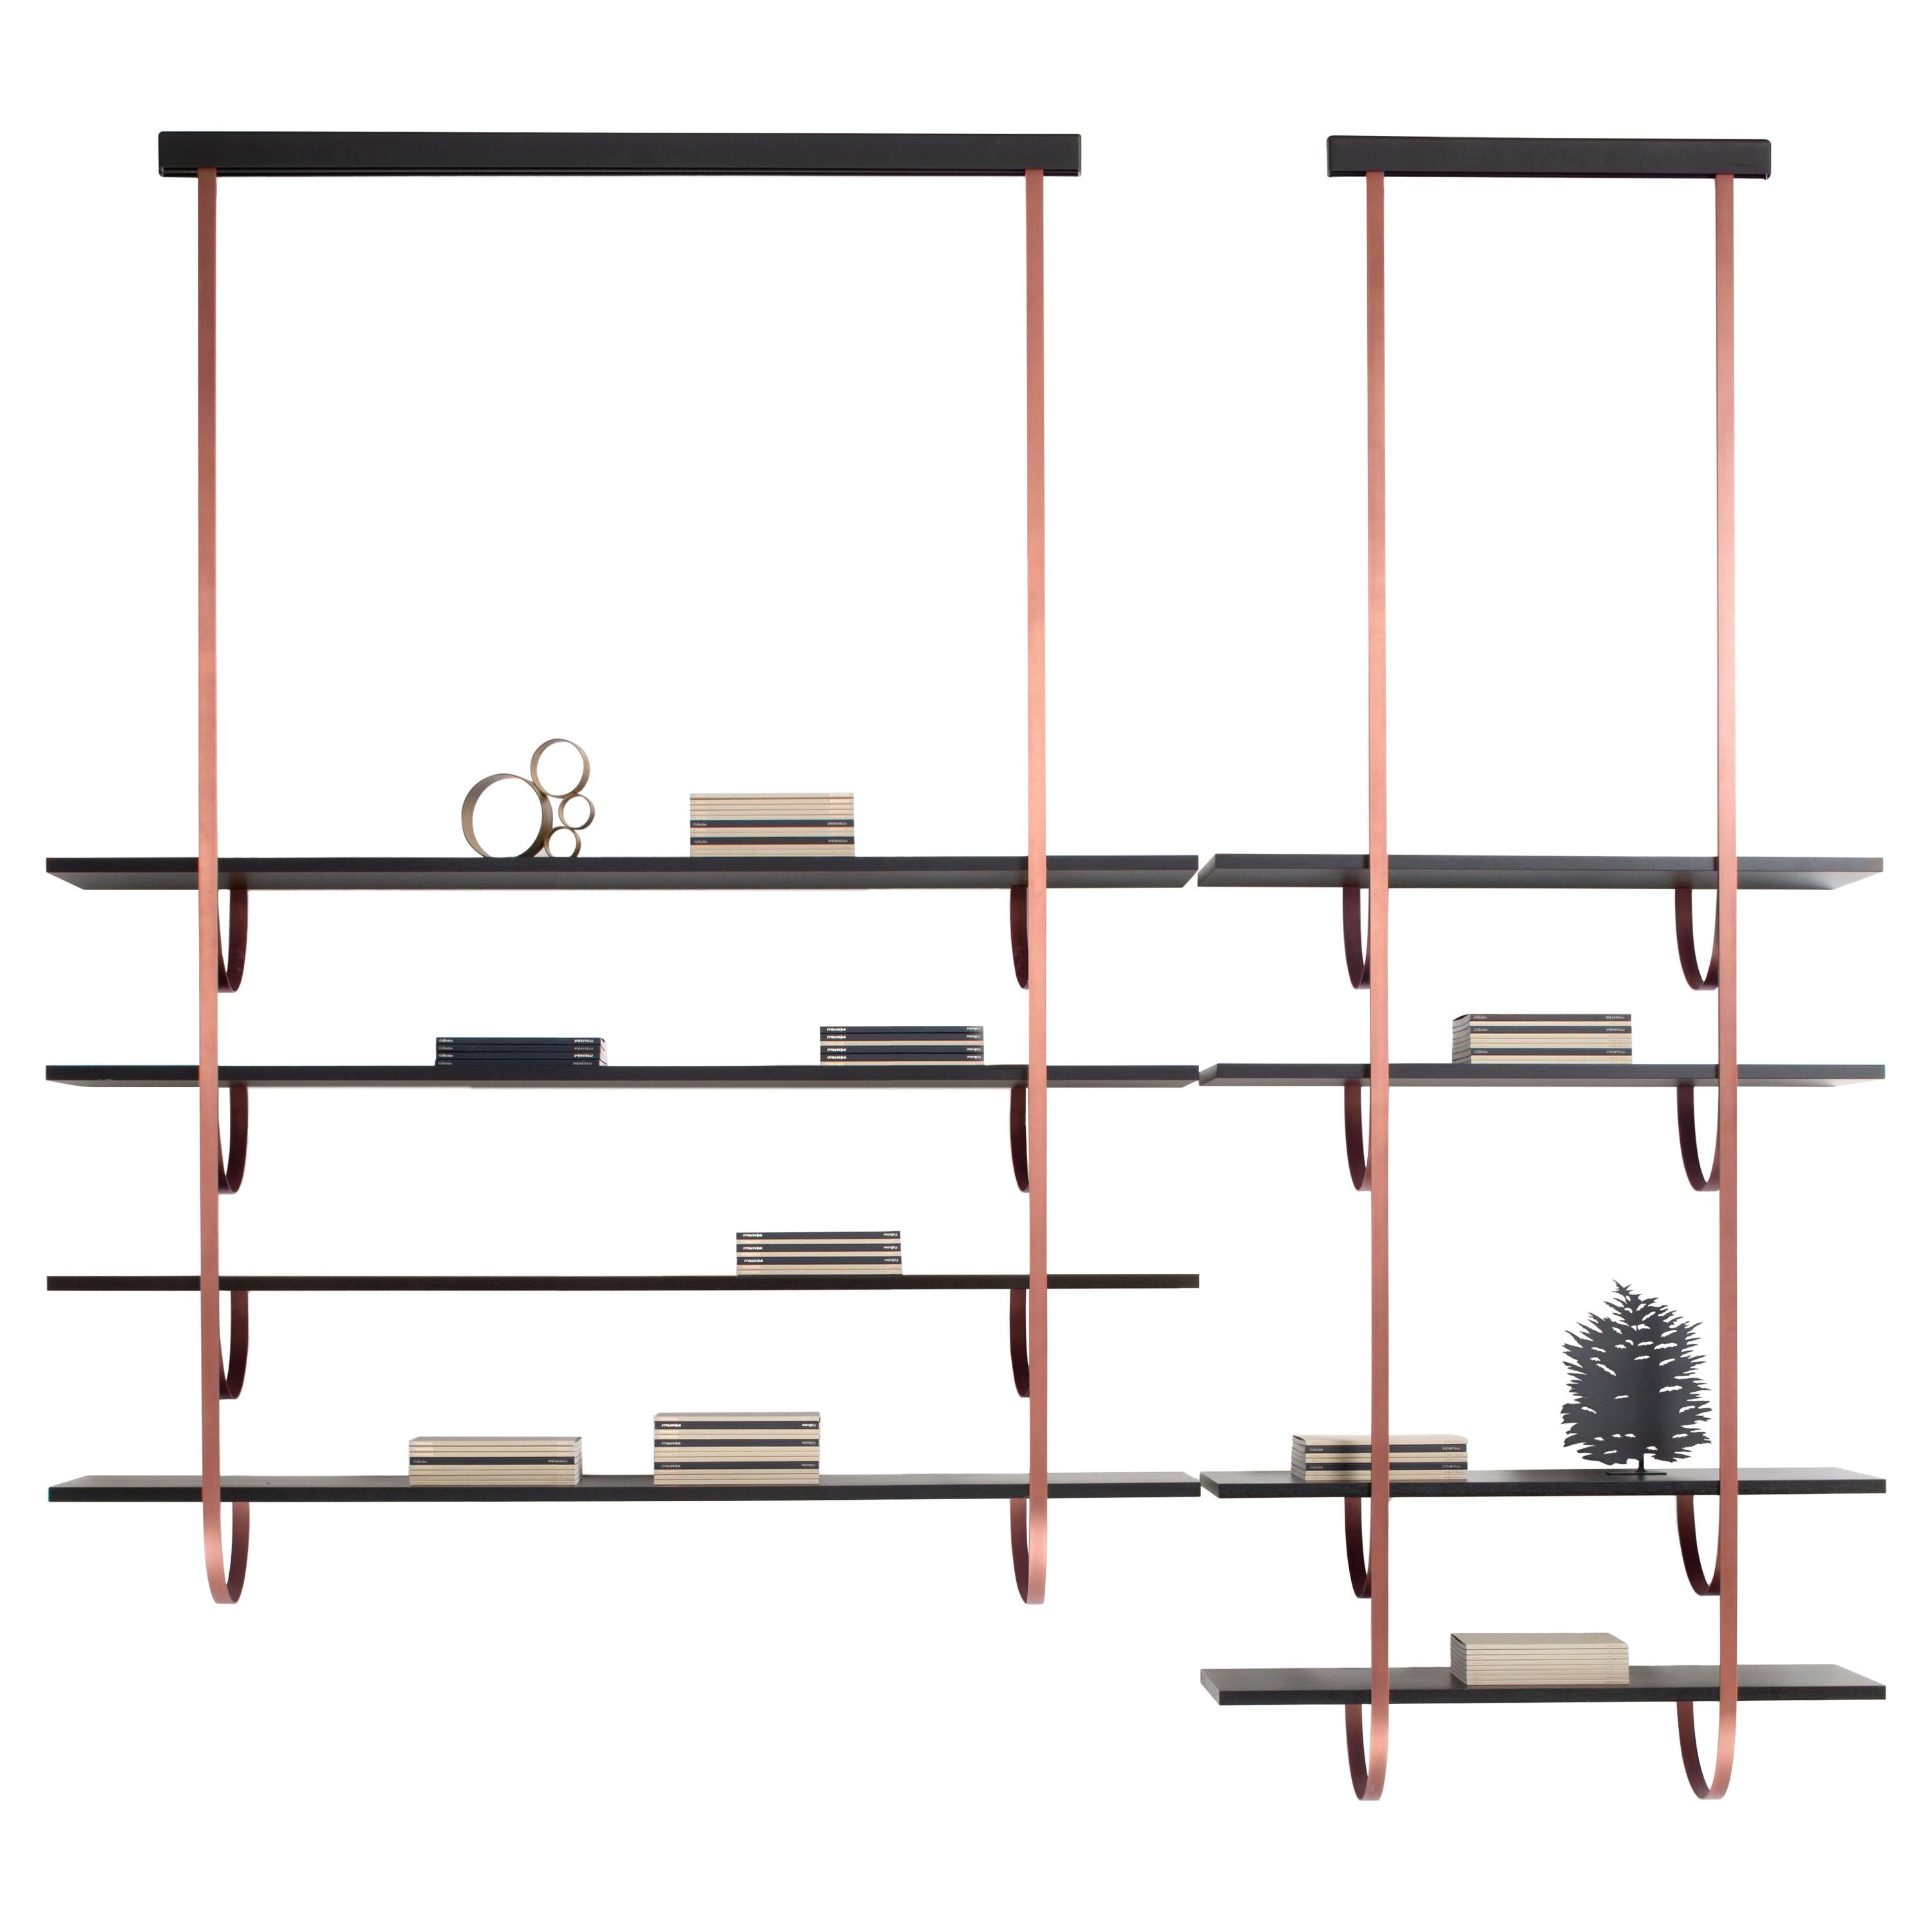 DeCastelli Talea 115 Bookshelf in Copper with 4 Wooden Shelves by LucidiPevere